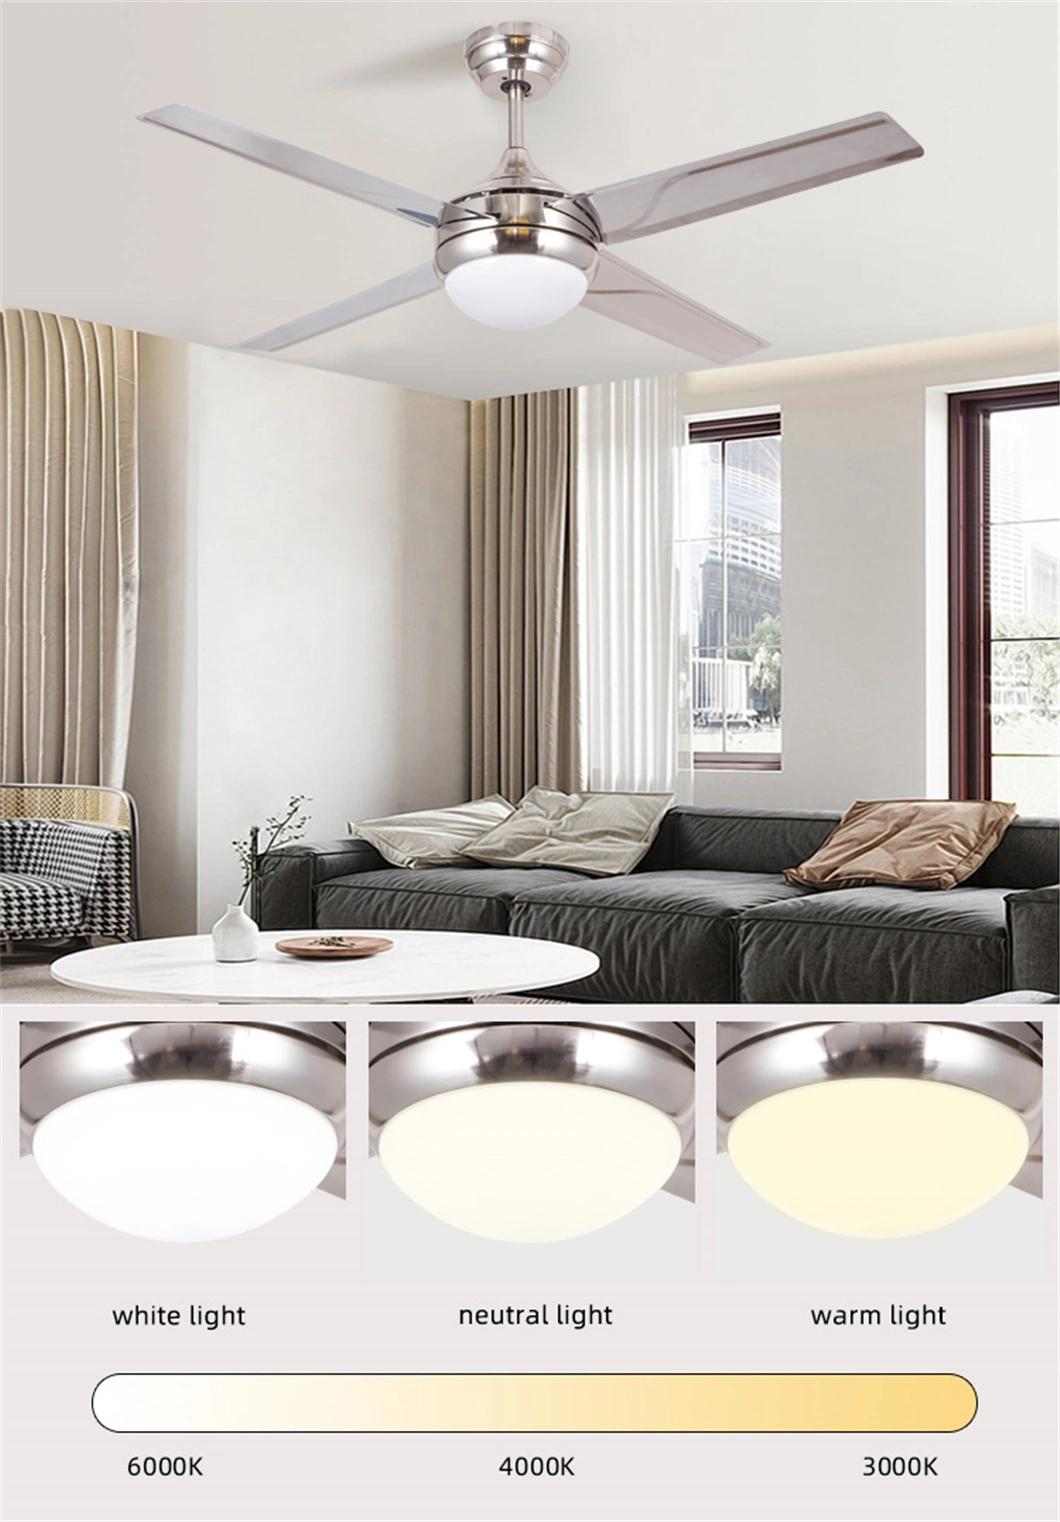 Modern Design Ceiling Fan Light Remote Control 3 Speed Choice 3 Colors Change Chandeliers with Fan